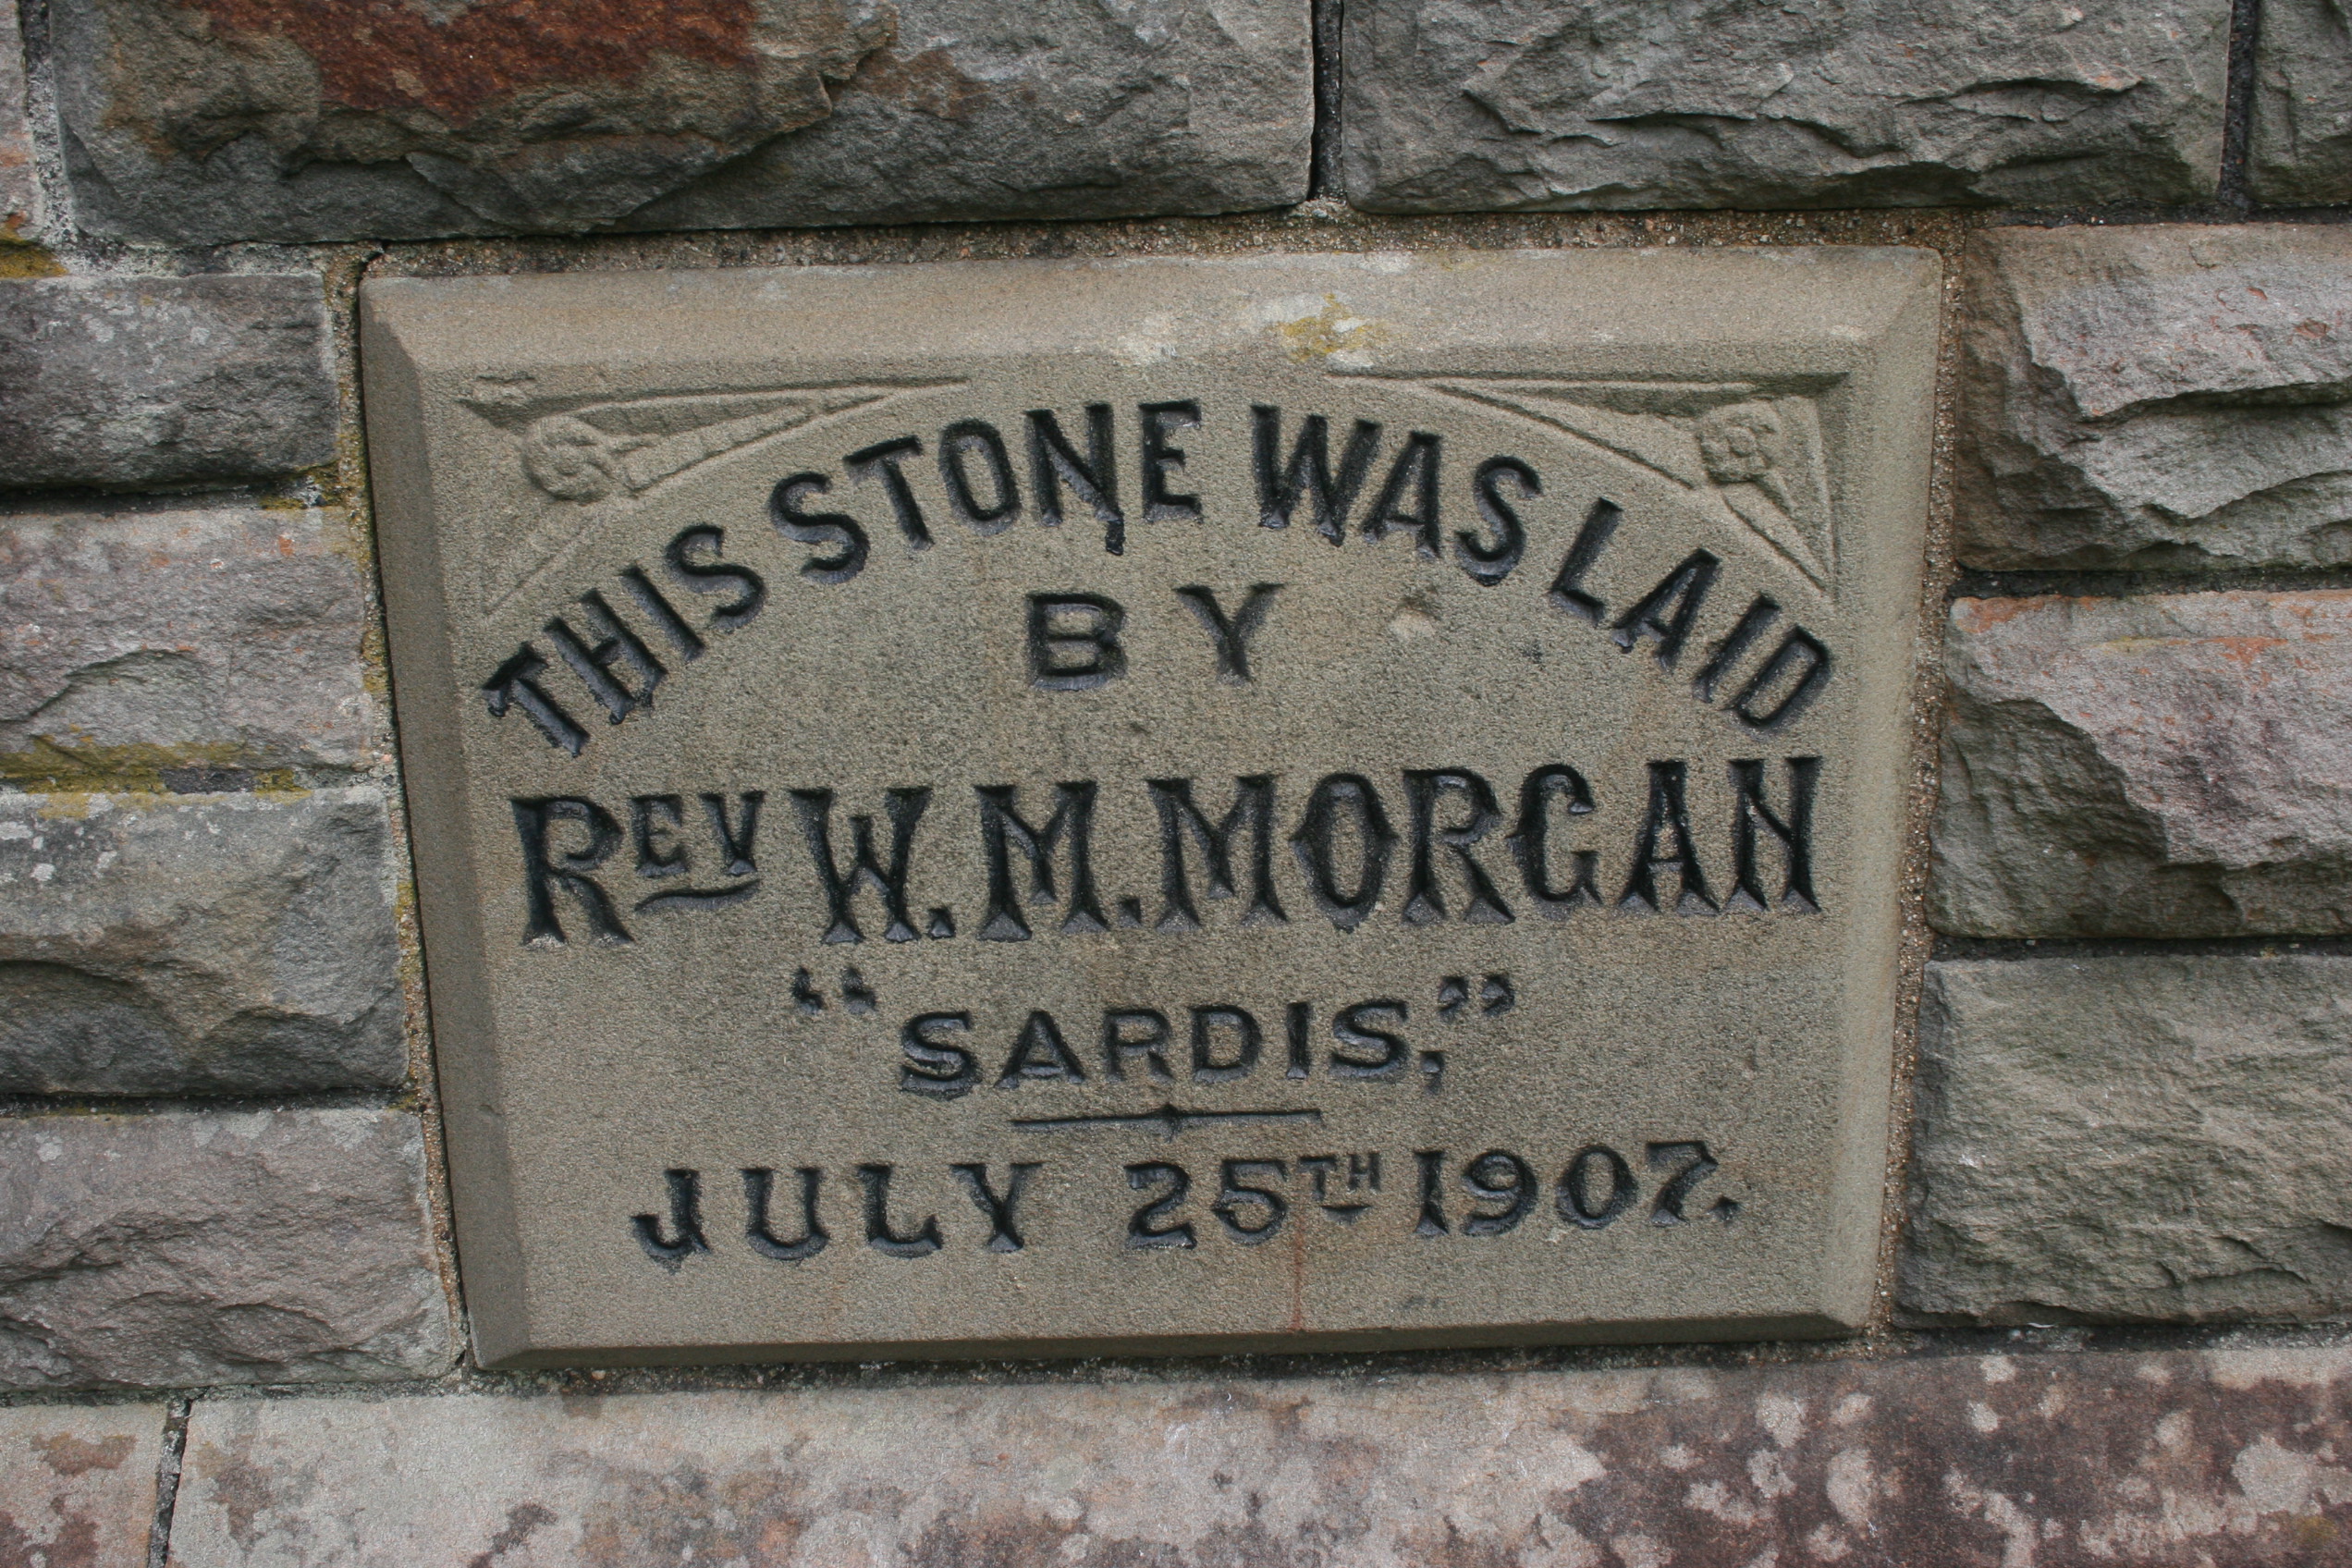 The foundation stone mentioning the Reverend of Sardis